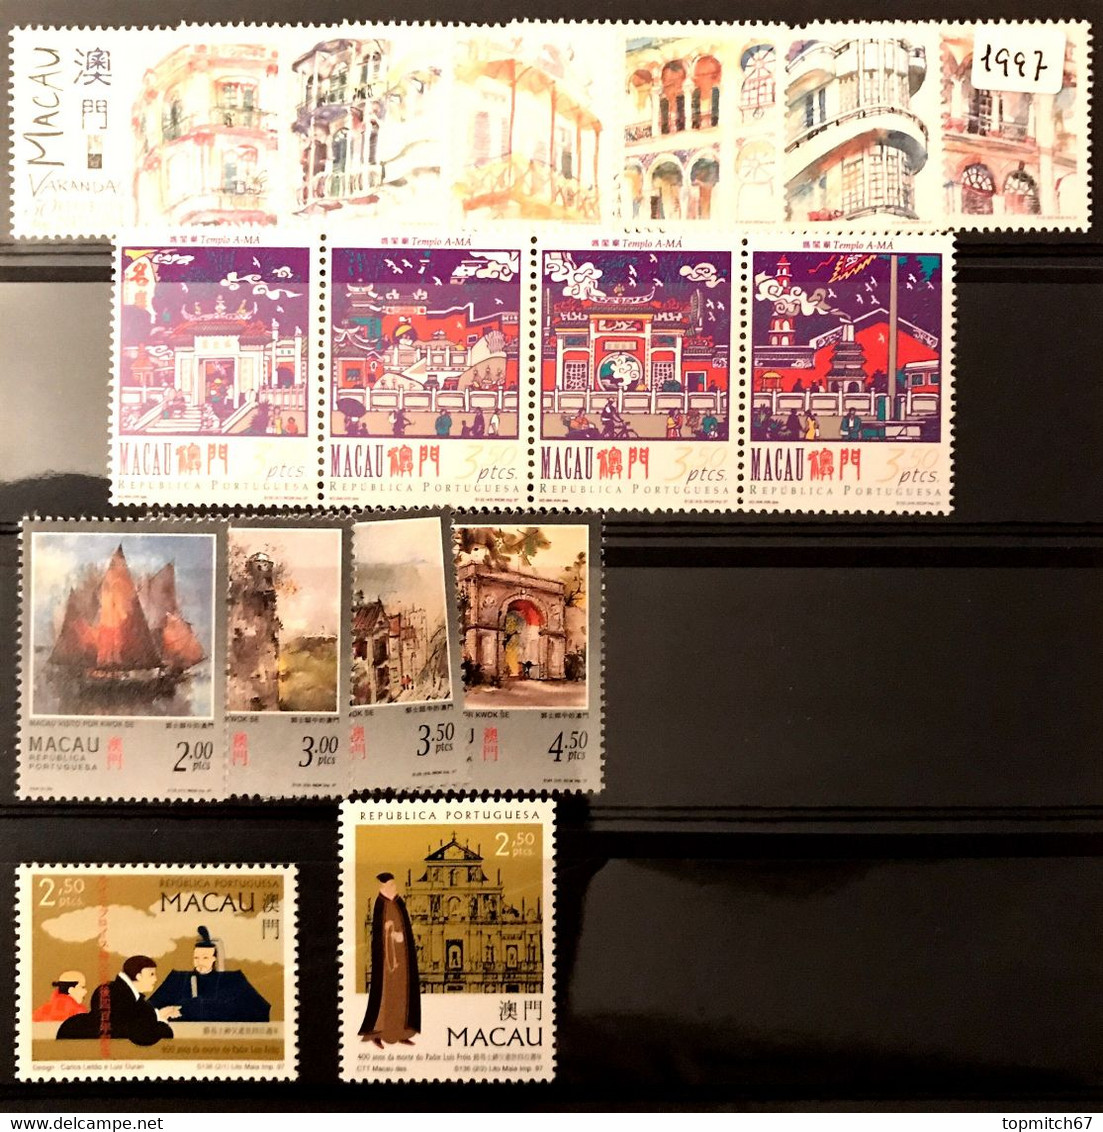 MAC0998MNH-Macau Annual booklet with all MNH stamps issued in 1997 - Macau -1997